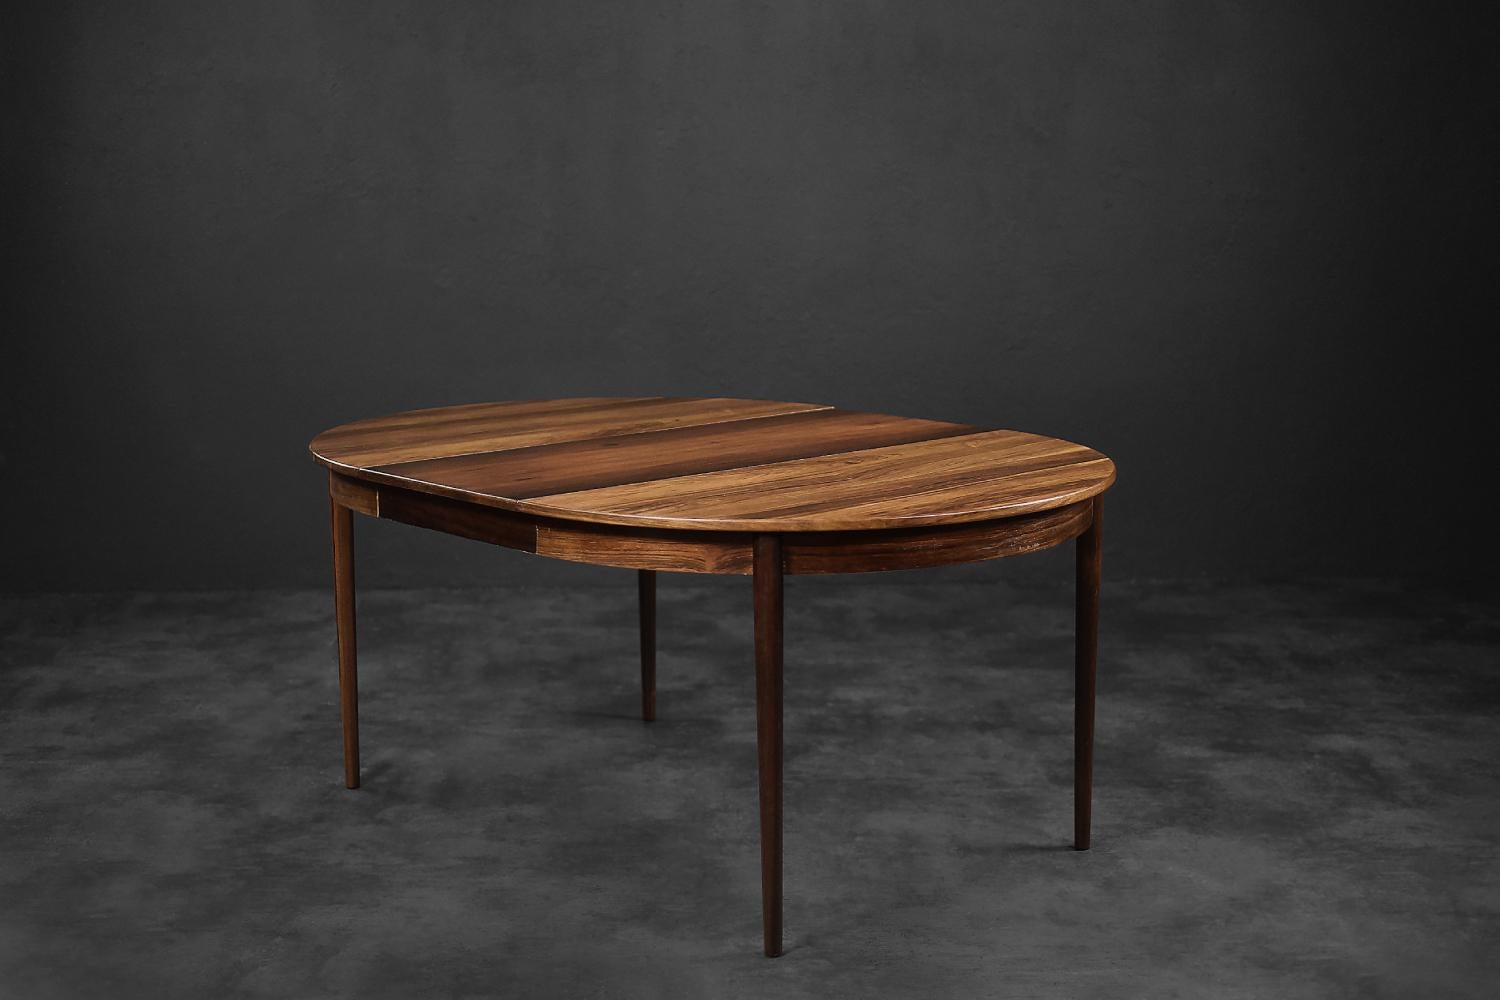 This modernist dining table was made in Denmark during the 1960s. It is made of precious rosewood in a warm shade of brown. It is characterized by attractive graining and high-quality workmanship. The table is endowed with three extra tops that can